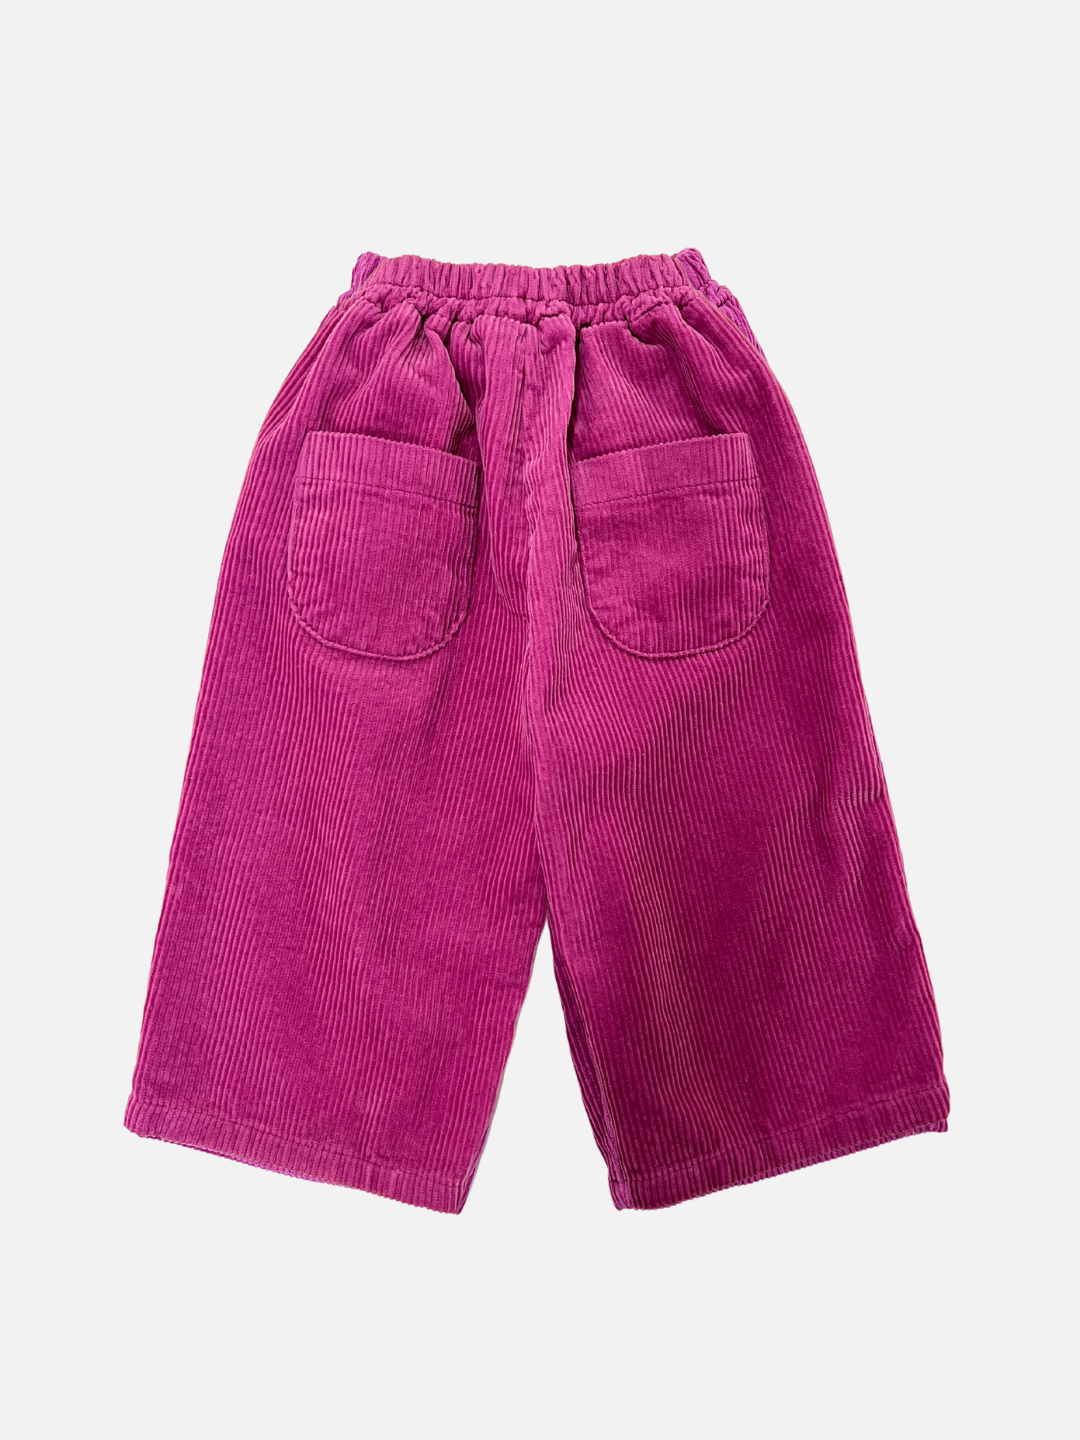 Back view of kids wide-leg corduroy pants in magenta pink, showing two rounded back pockets.